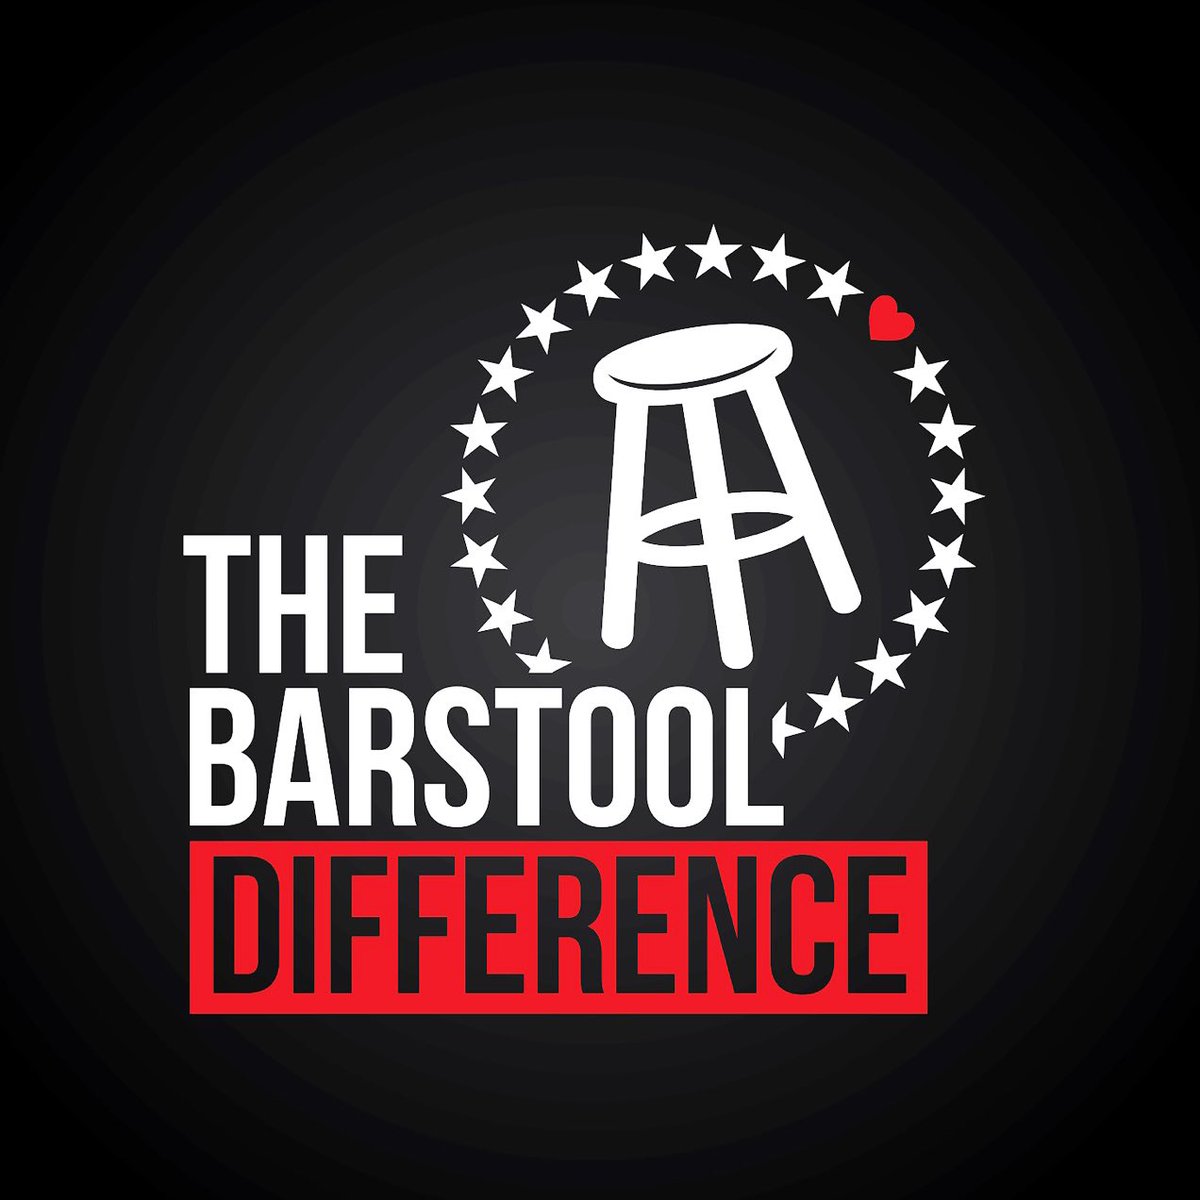 People used to say “Barstool Difference” whenever we messed up. Somehow we messed our way up to raising 40+ million dollars for small businesses We want to put that money to work for female run companies affected by COVID Tag one. #WorkLikeAGirl Apply: Barstool.link/worklikeagirl-…